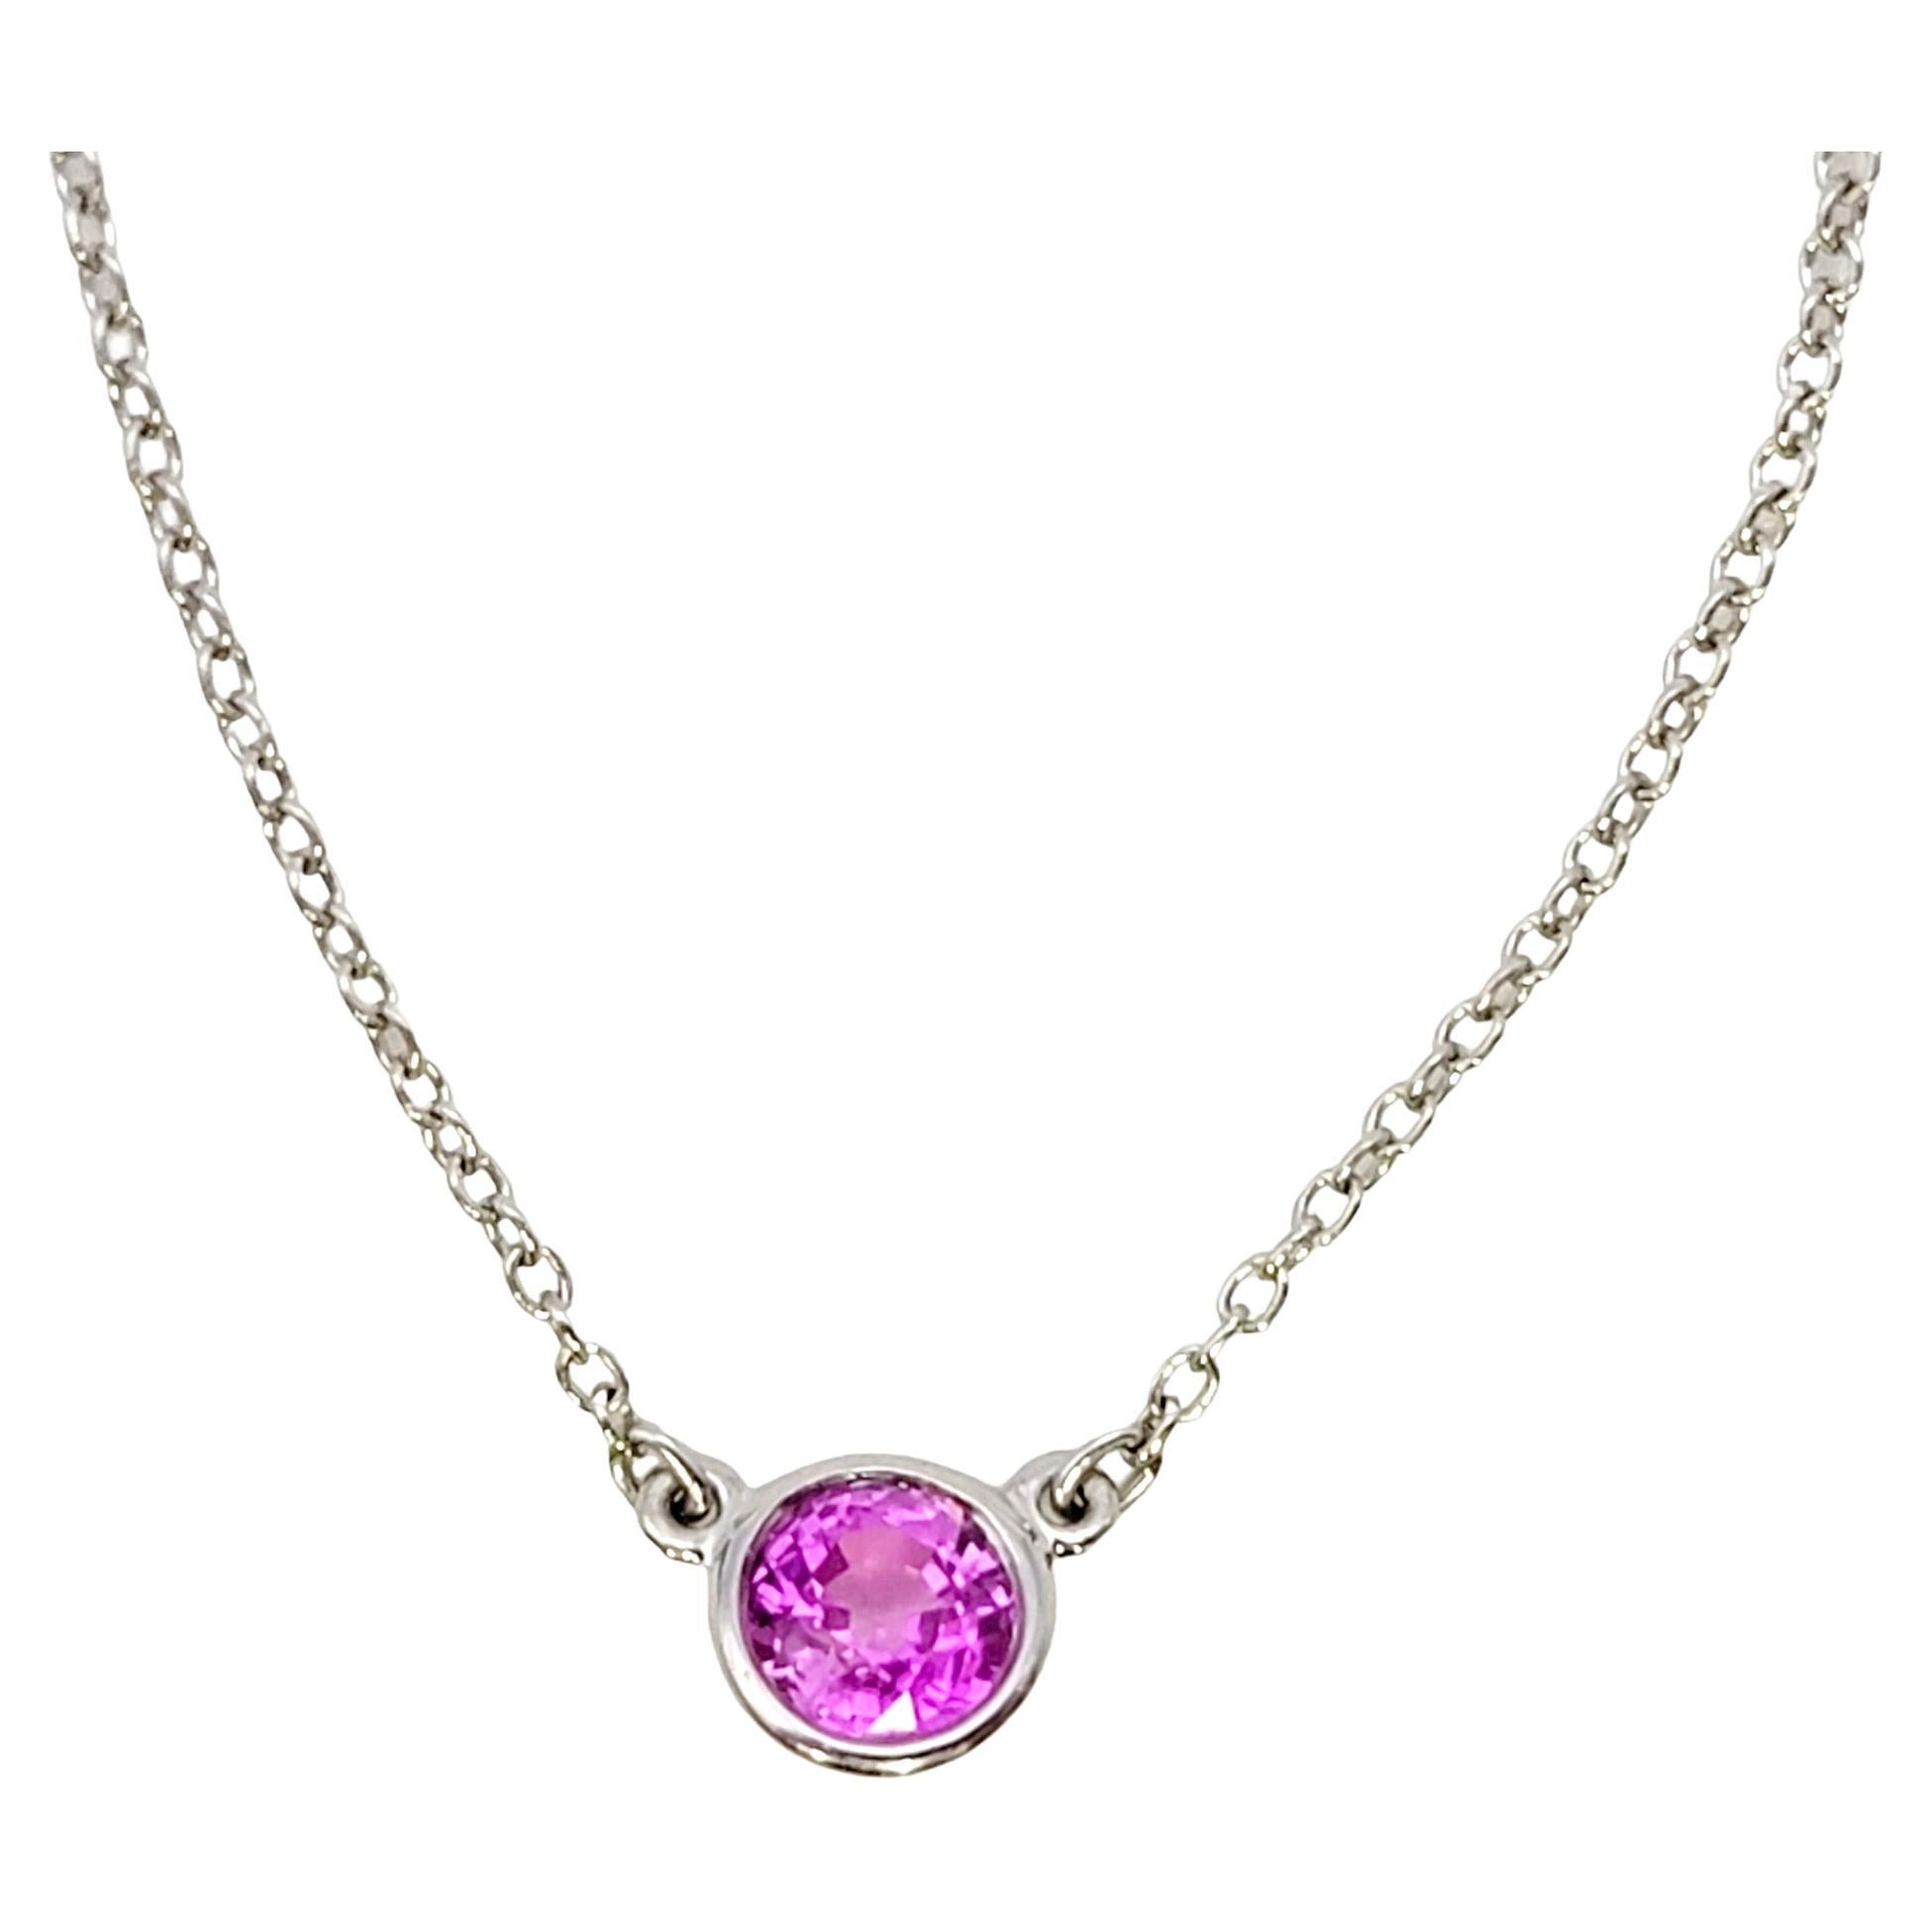 This dainty 'Color by the Yard' sapphire pendant necklace from Tiffany & Co. is the epitome of understated elegance. Featuring a delicate cable chain and single bezel set solitaire natural round pink sapphire, this piece goes with just about